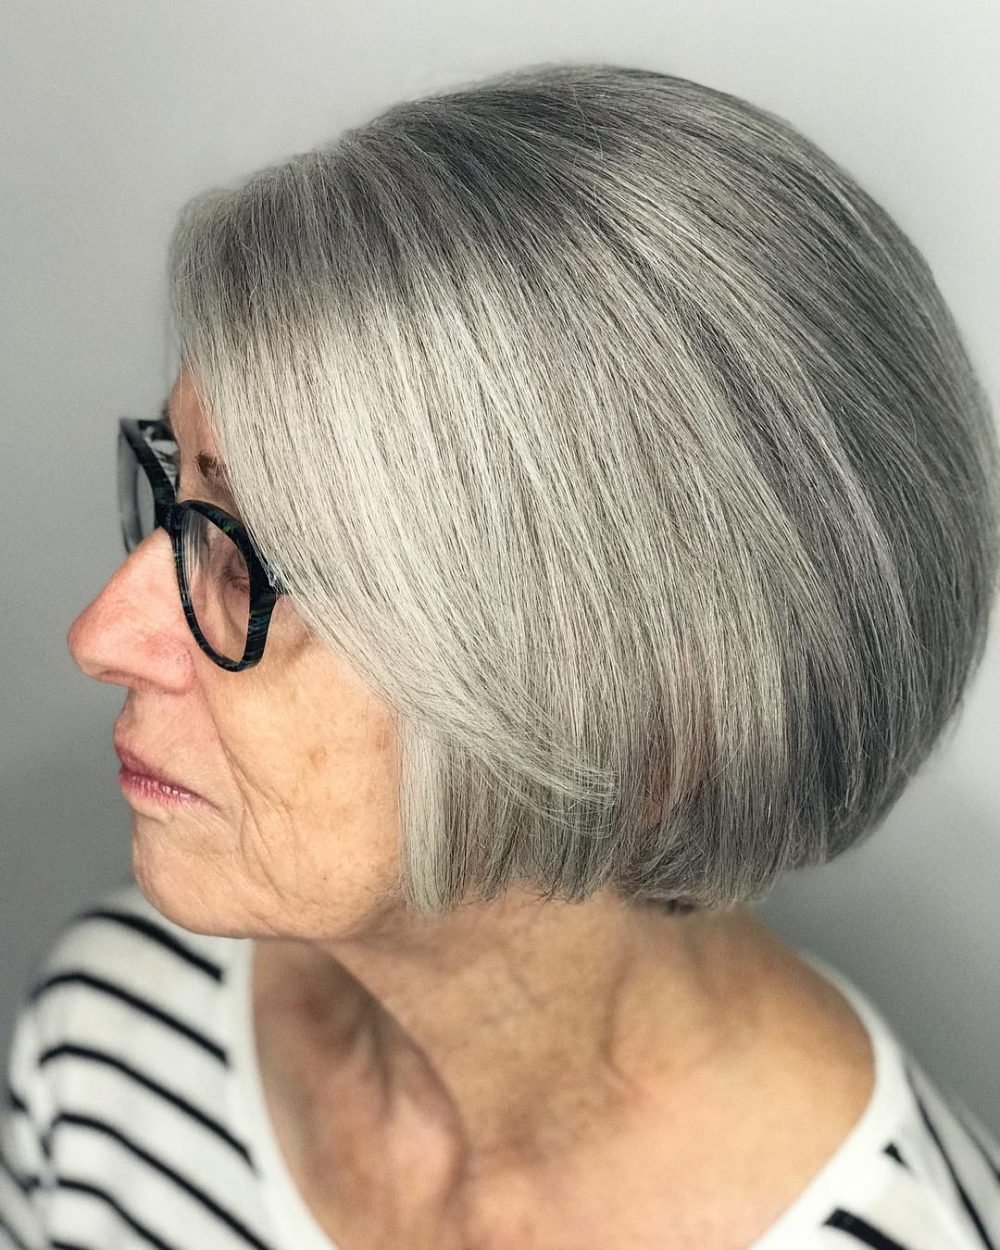 Short gray hairstyle for women over 60 with glasses